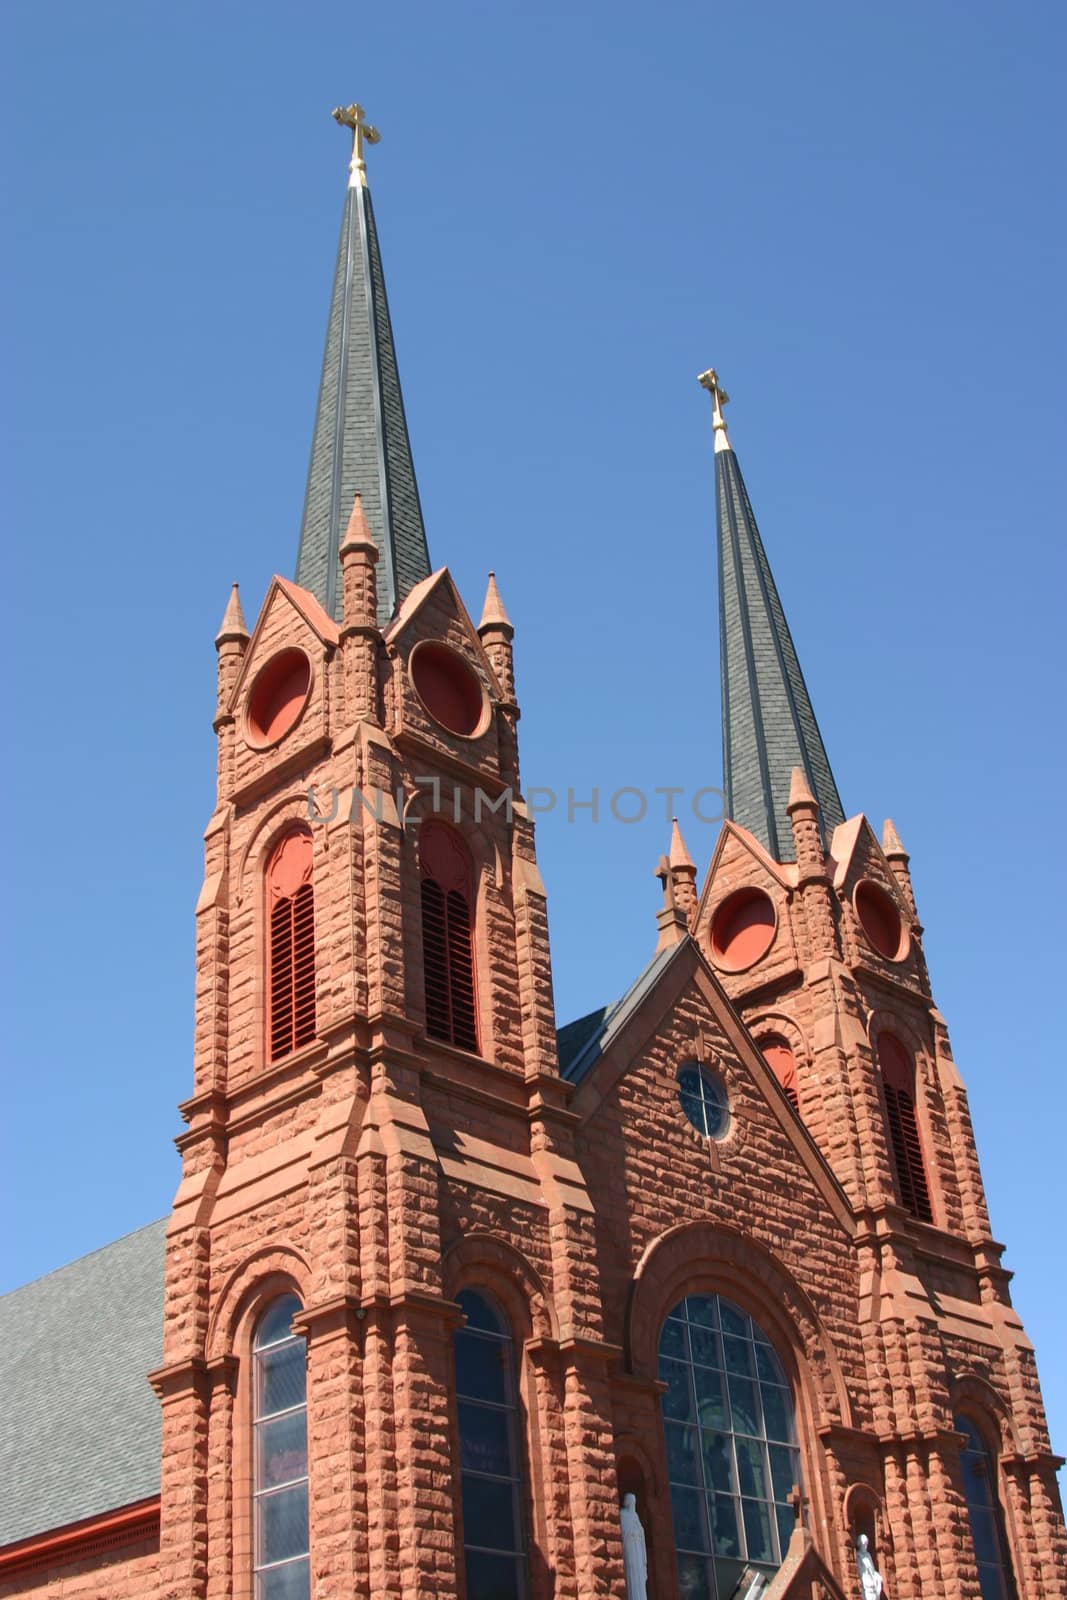 A corner view of St. Joseph’s Church looking up at the bell towers. 